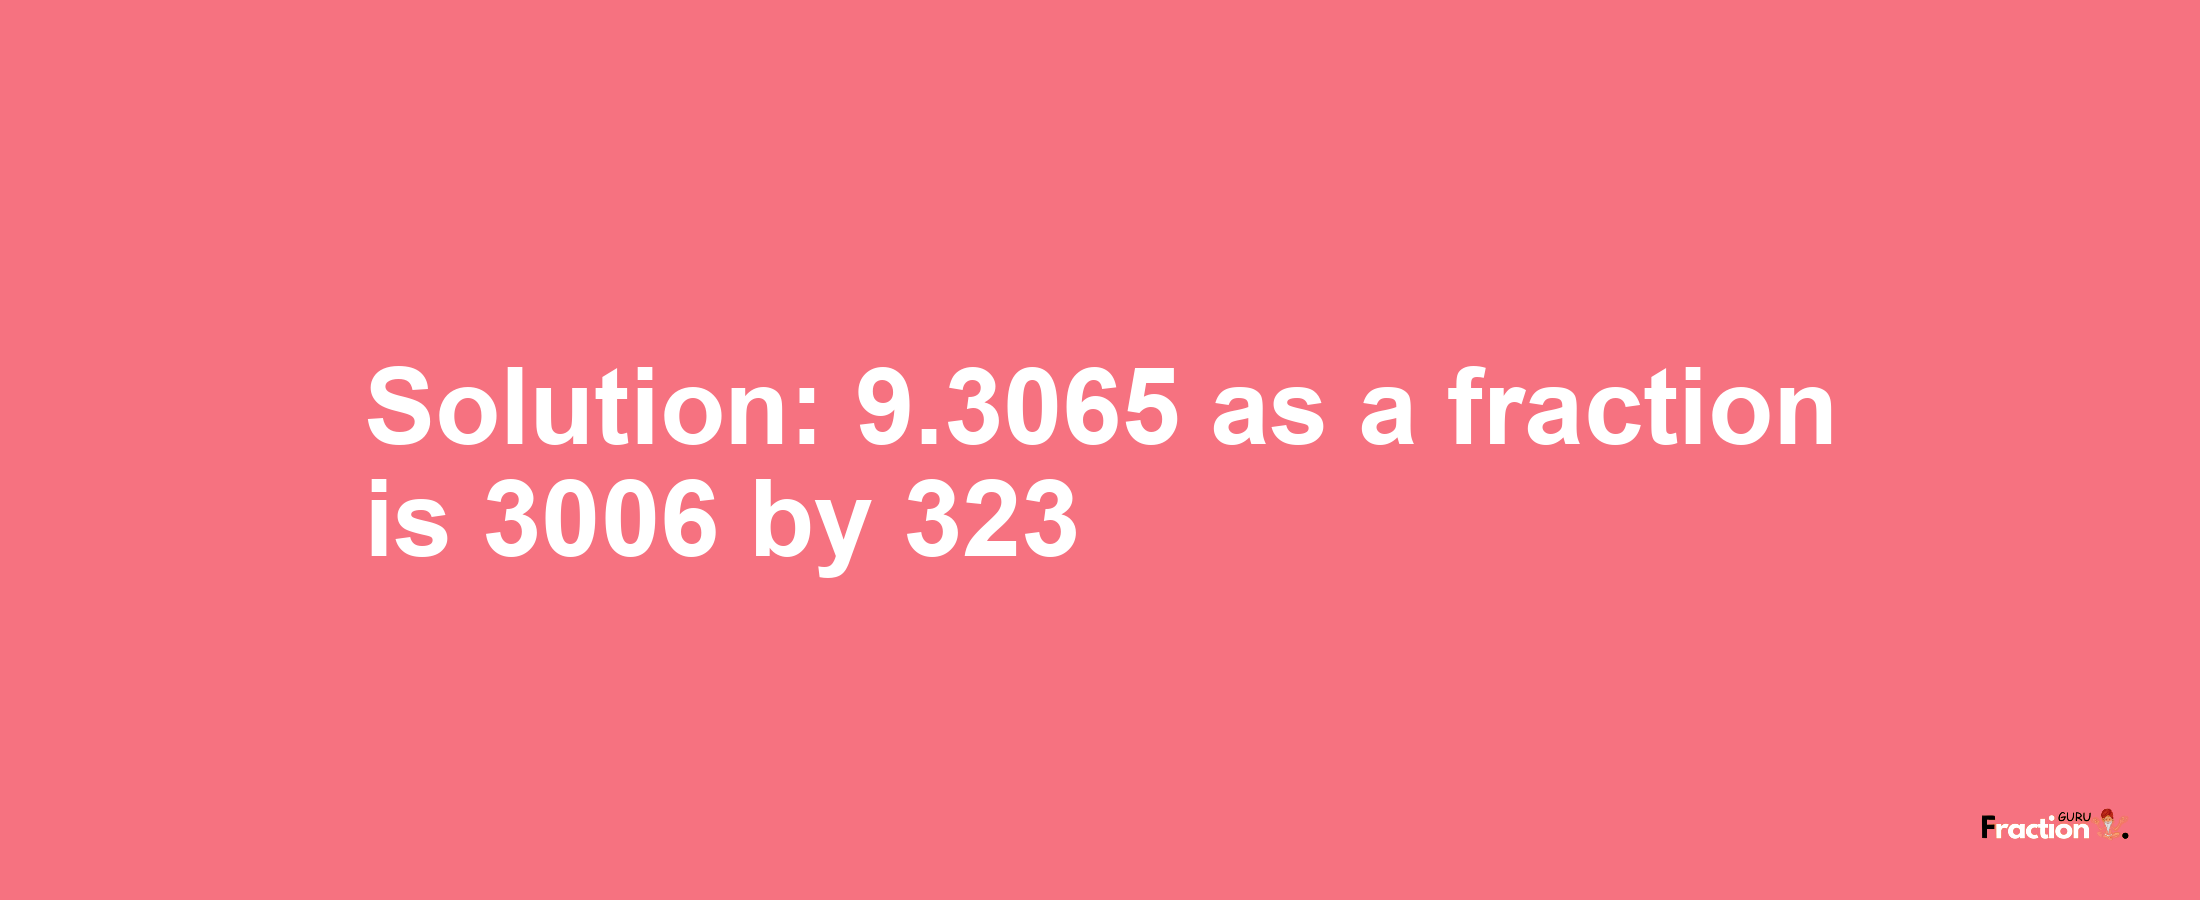 Solution:9.3065 as a fraction is 3006/323